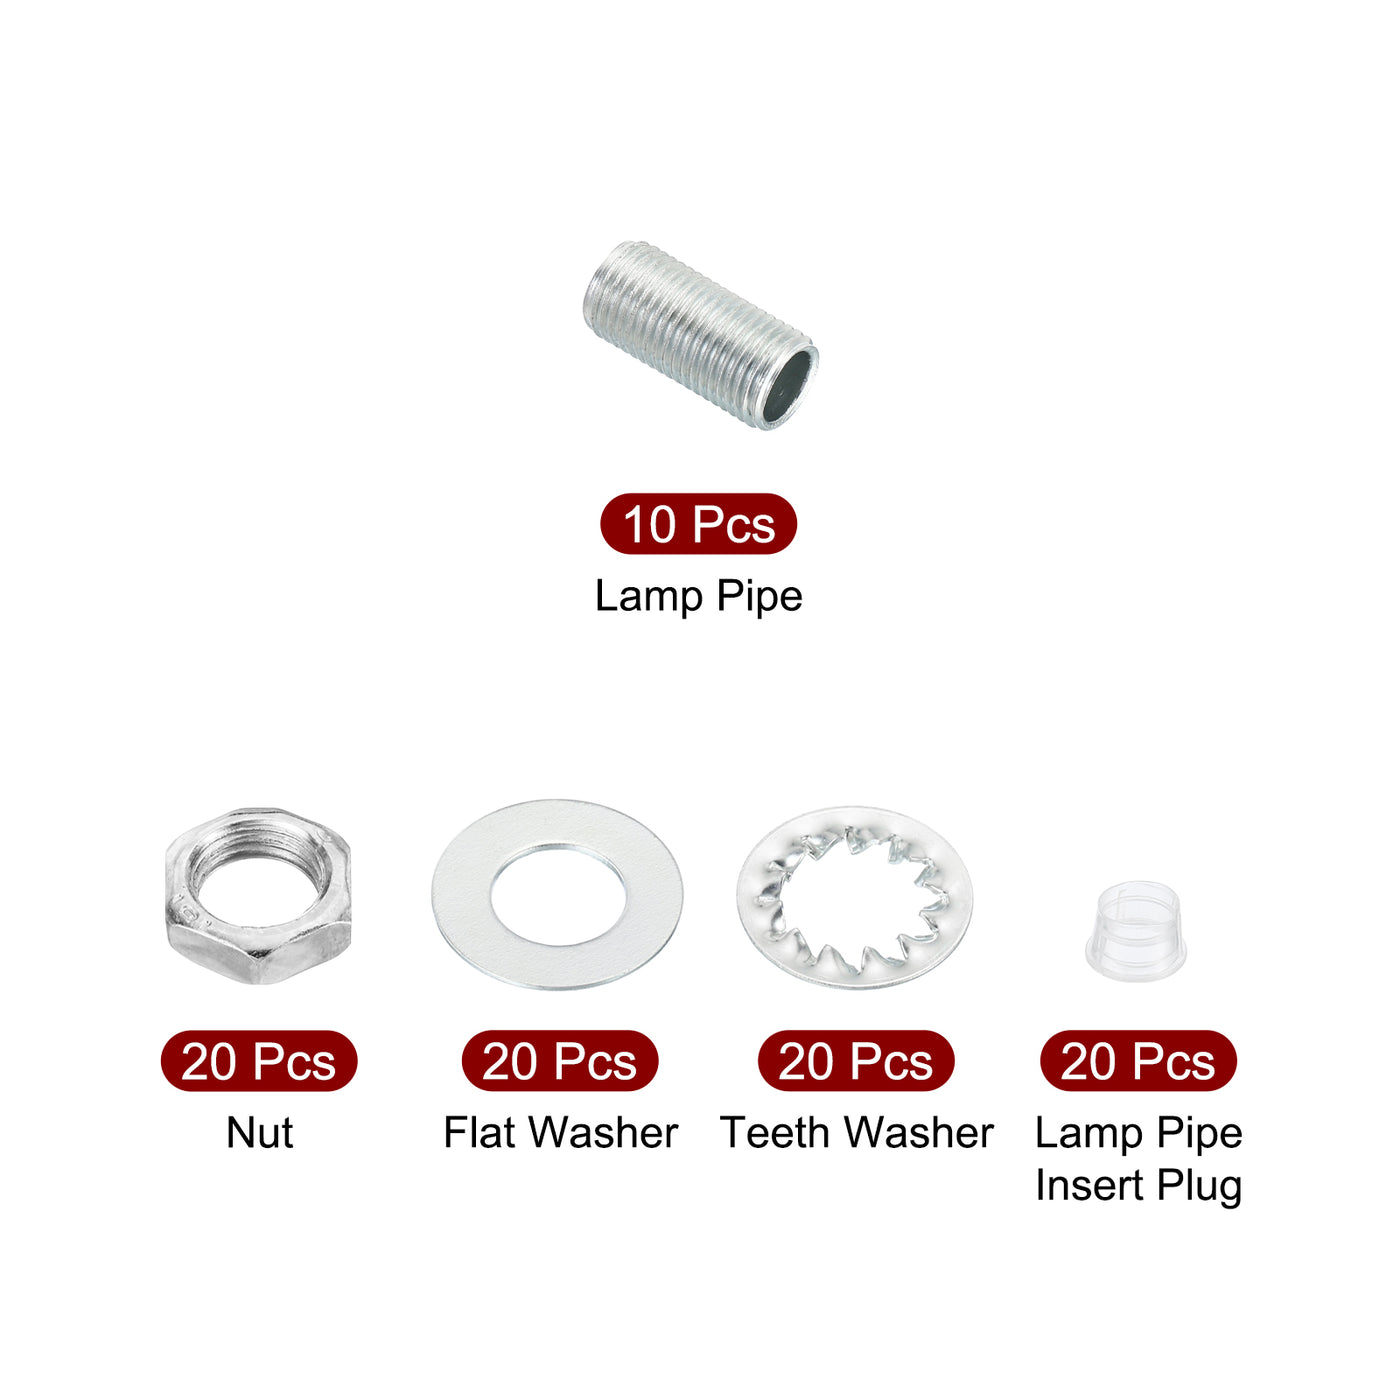 Harfington M10 Thread 0.79" Lamp Pipe Kit with Lock Nuts Washers, Fasteners Assortment Hardware for Chandelier Ceiling Light DIY, Zinc Plating